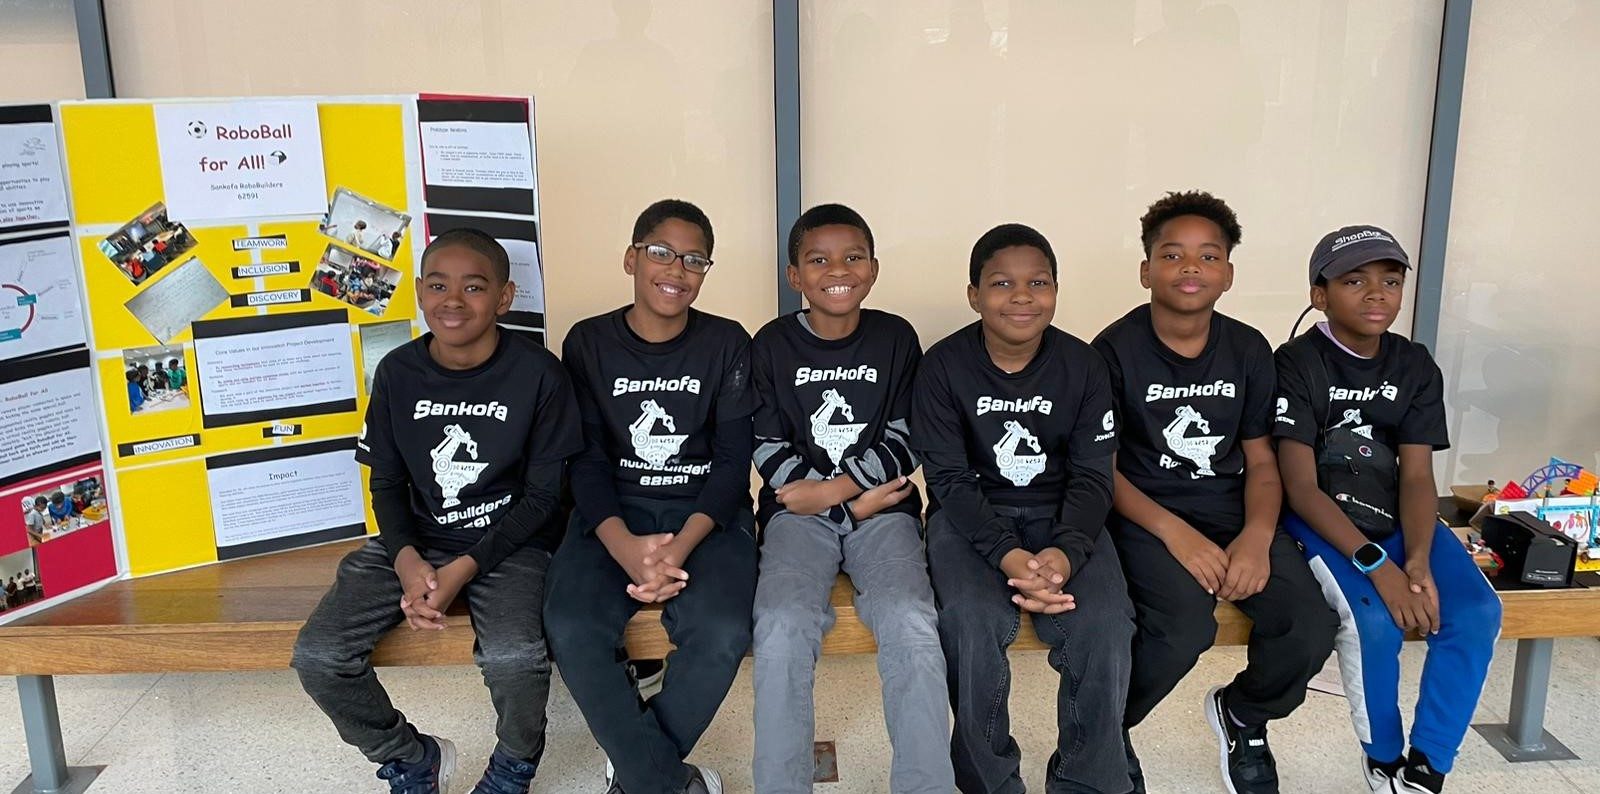 Six young Black boys are seating side by side on a bench. They are wearing black t-shirts with white print that say Sankofa RoboBuilders.